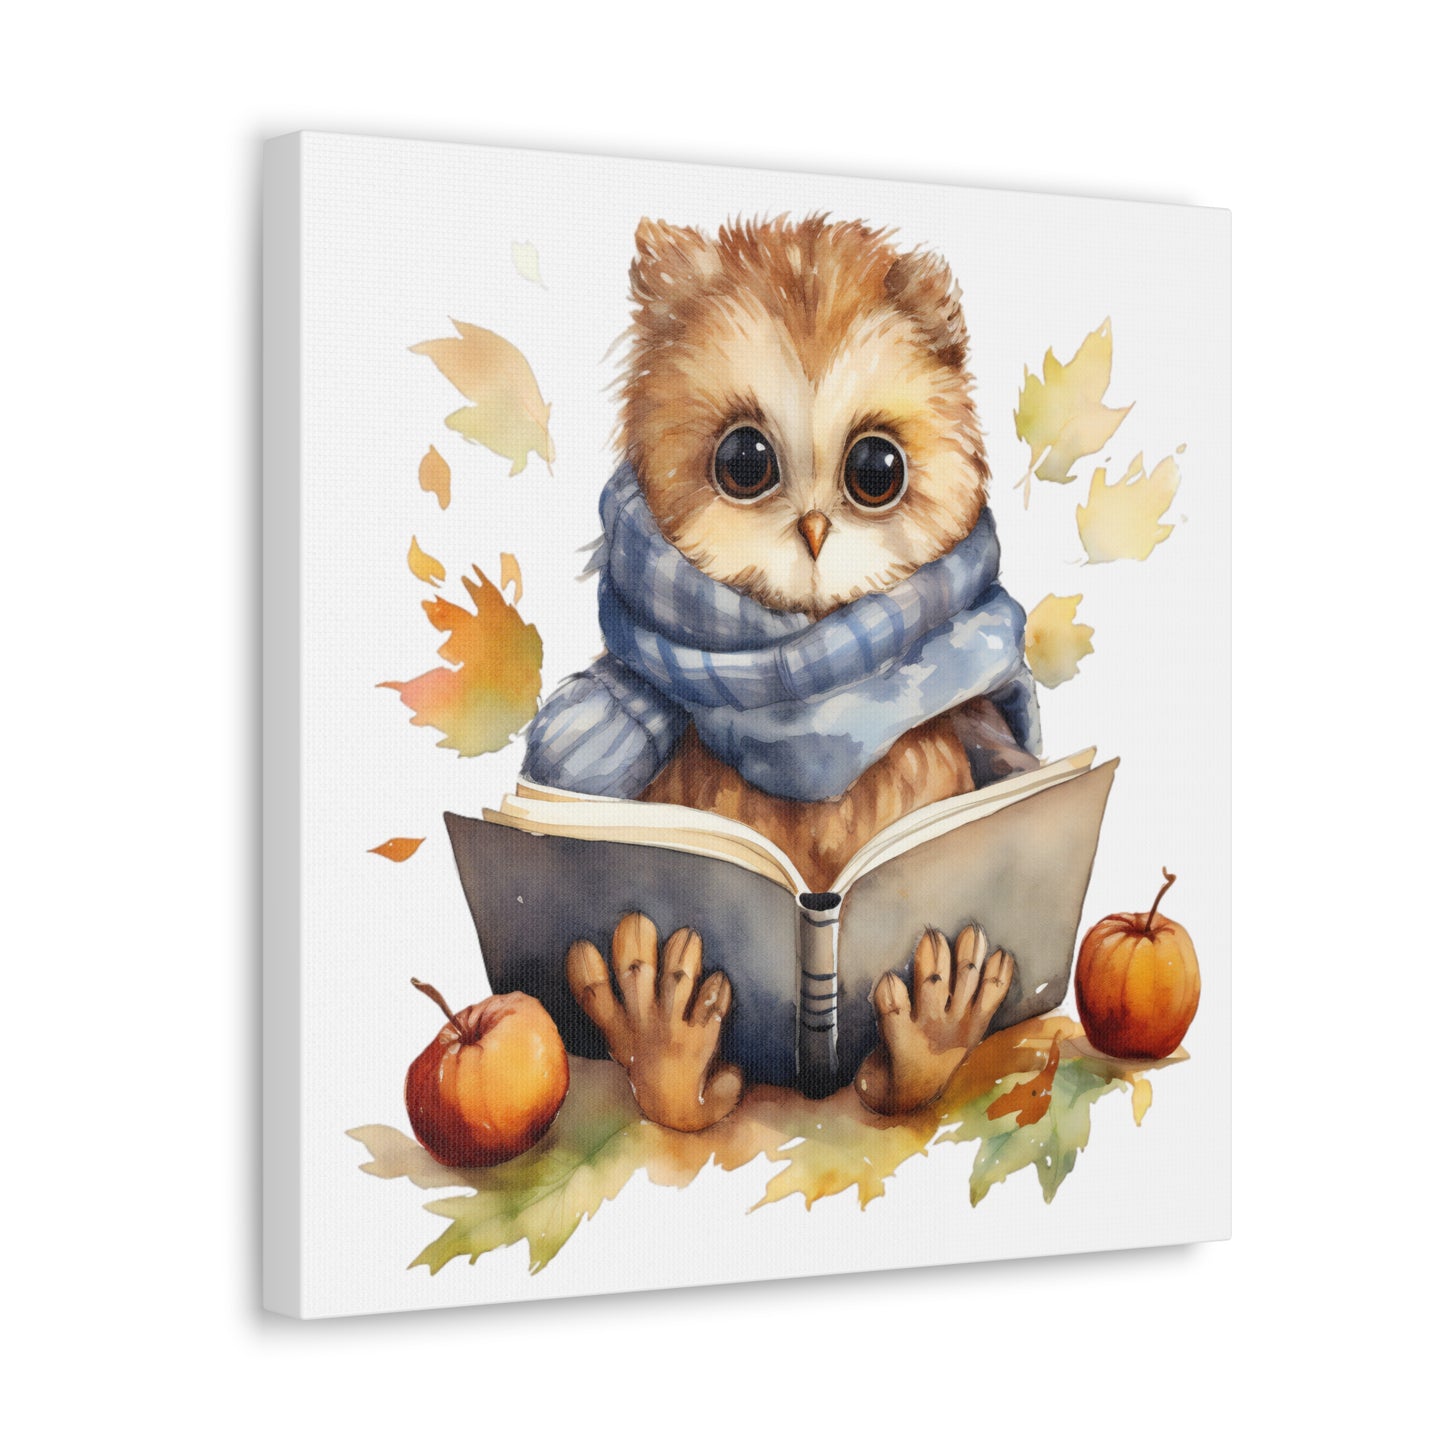 Owl Reading Book Watercolor Canvas - Baby Owl Wall Art